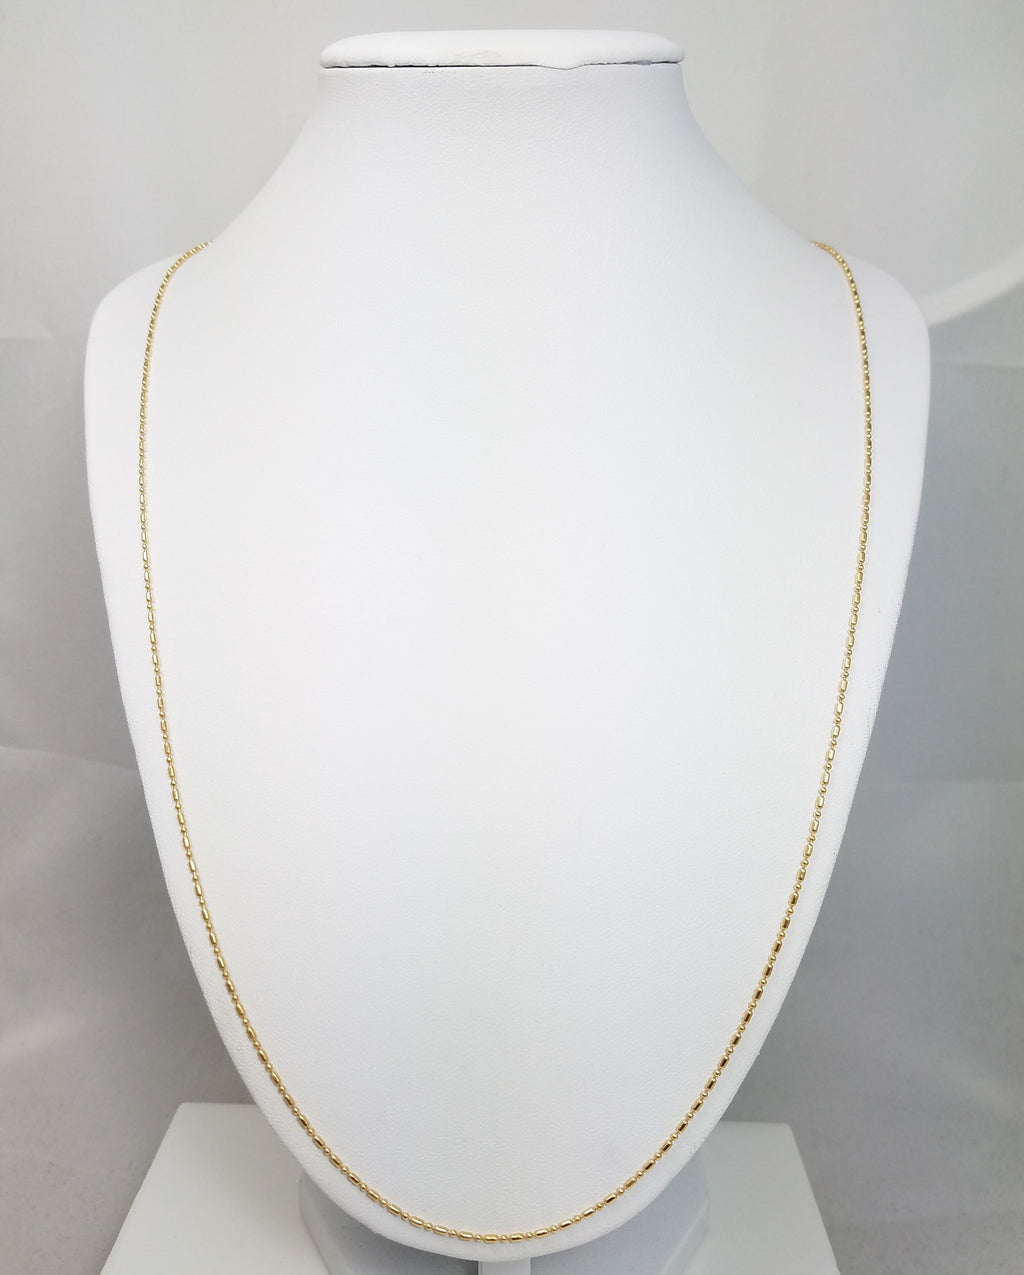 28" 14k Solid Yellow Gold Microbead Chain Necklace